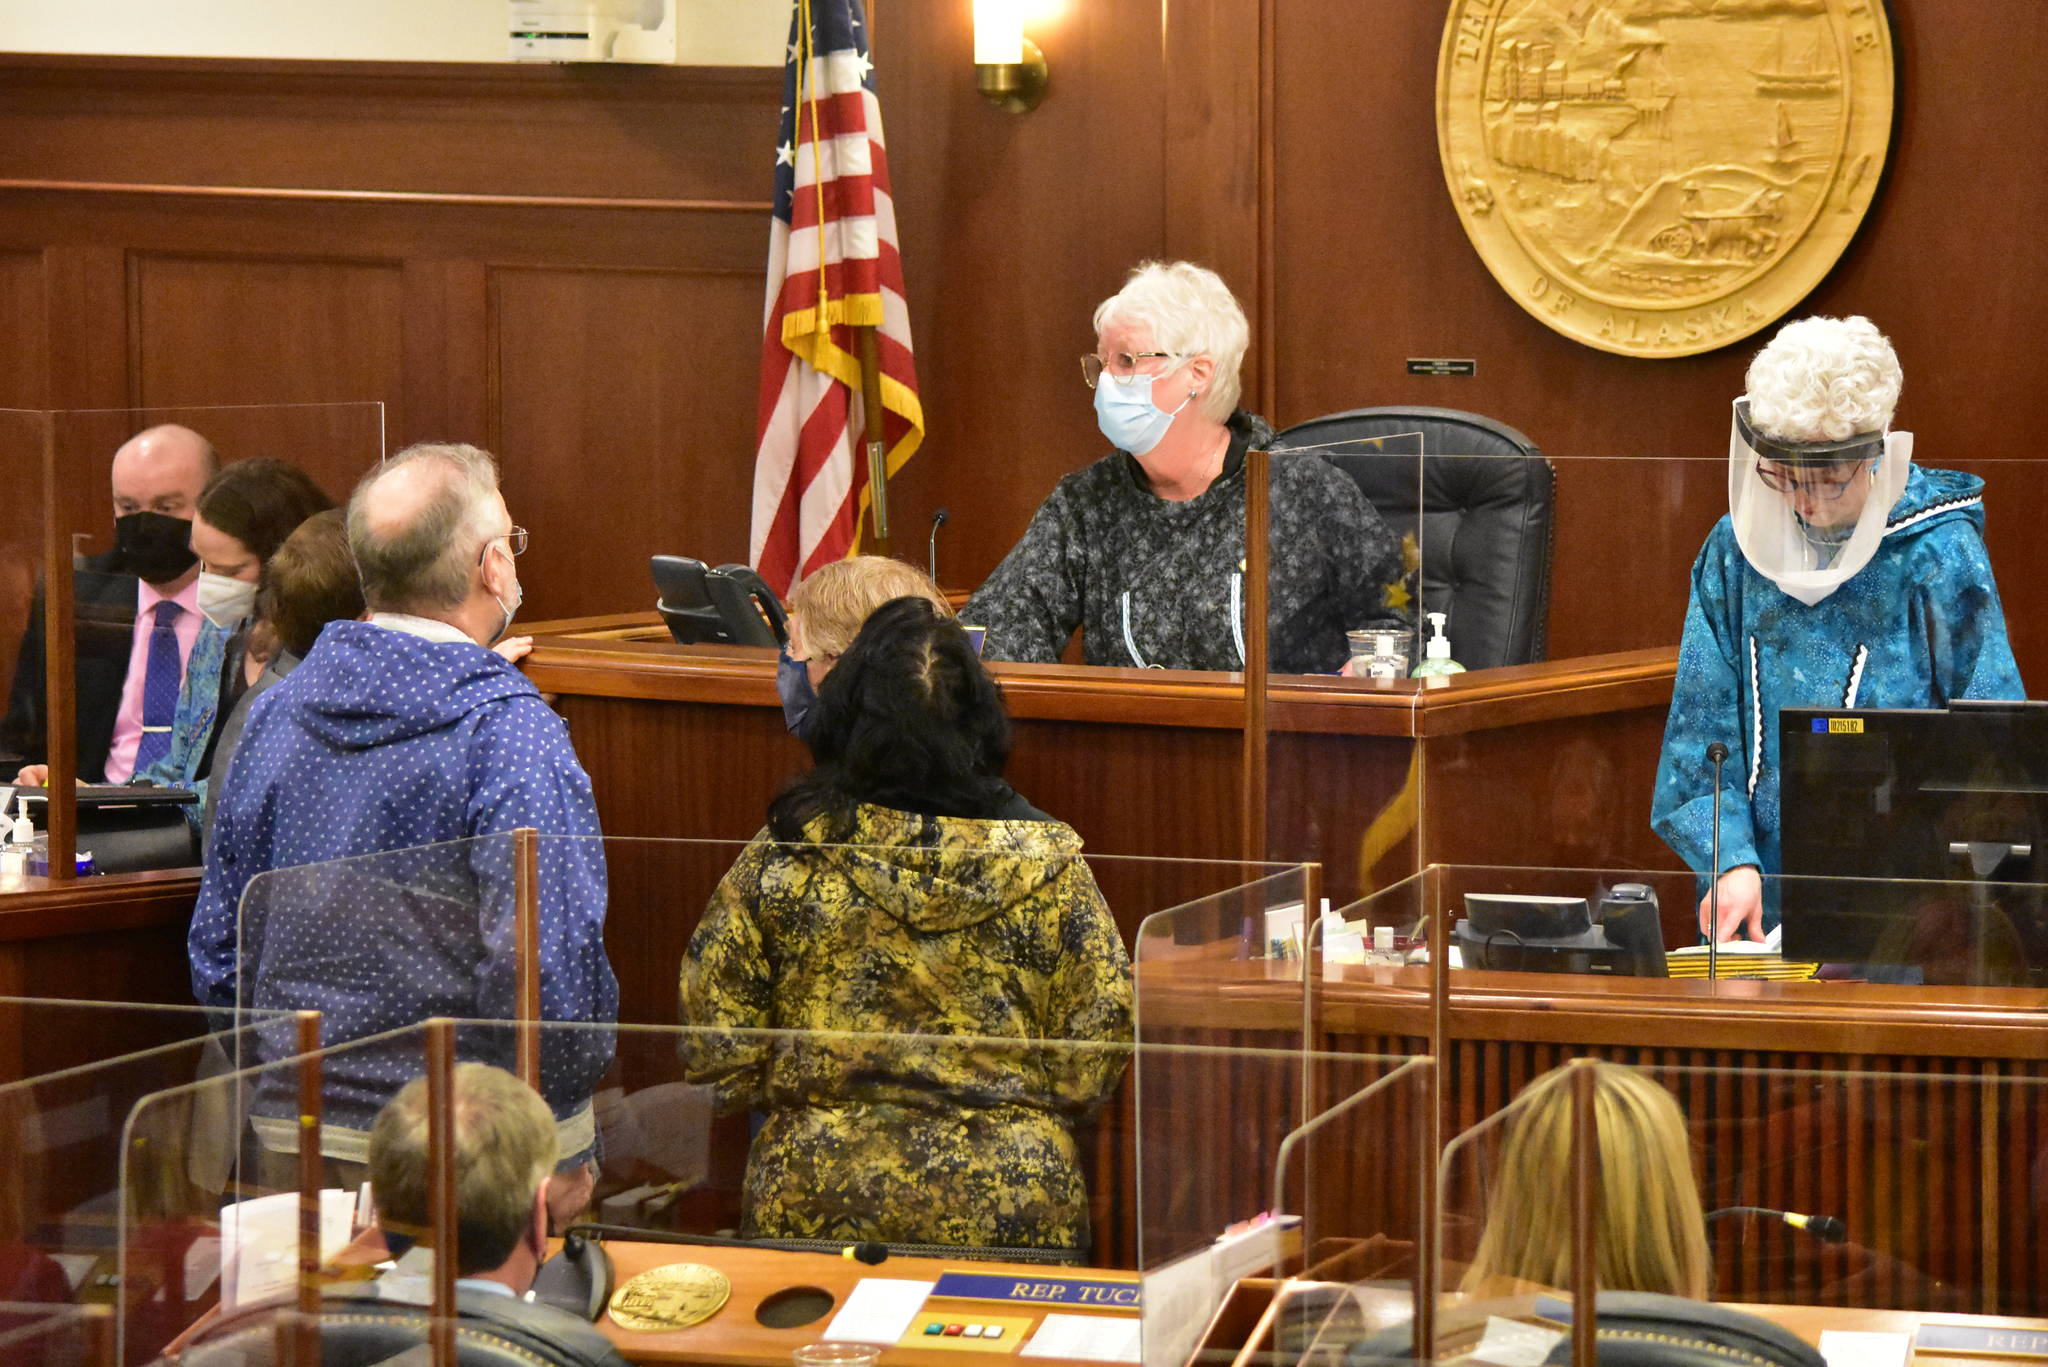 Speaker Louise Stutes, R-Kodiak, speaks to Rep. Chris Kurka, R-Wasilla, who’s behind Rep. Bryce Edgmon, I-Dillingham, at left, regarding the wording on his face mask on Friday, March 19, 2021. (Peter Segall / Juneau Empire)